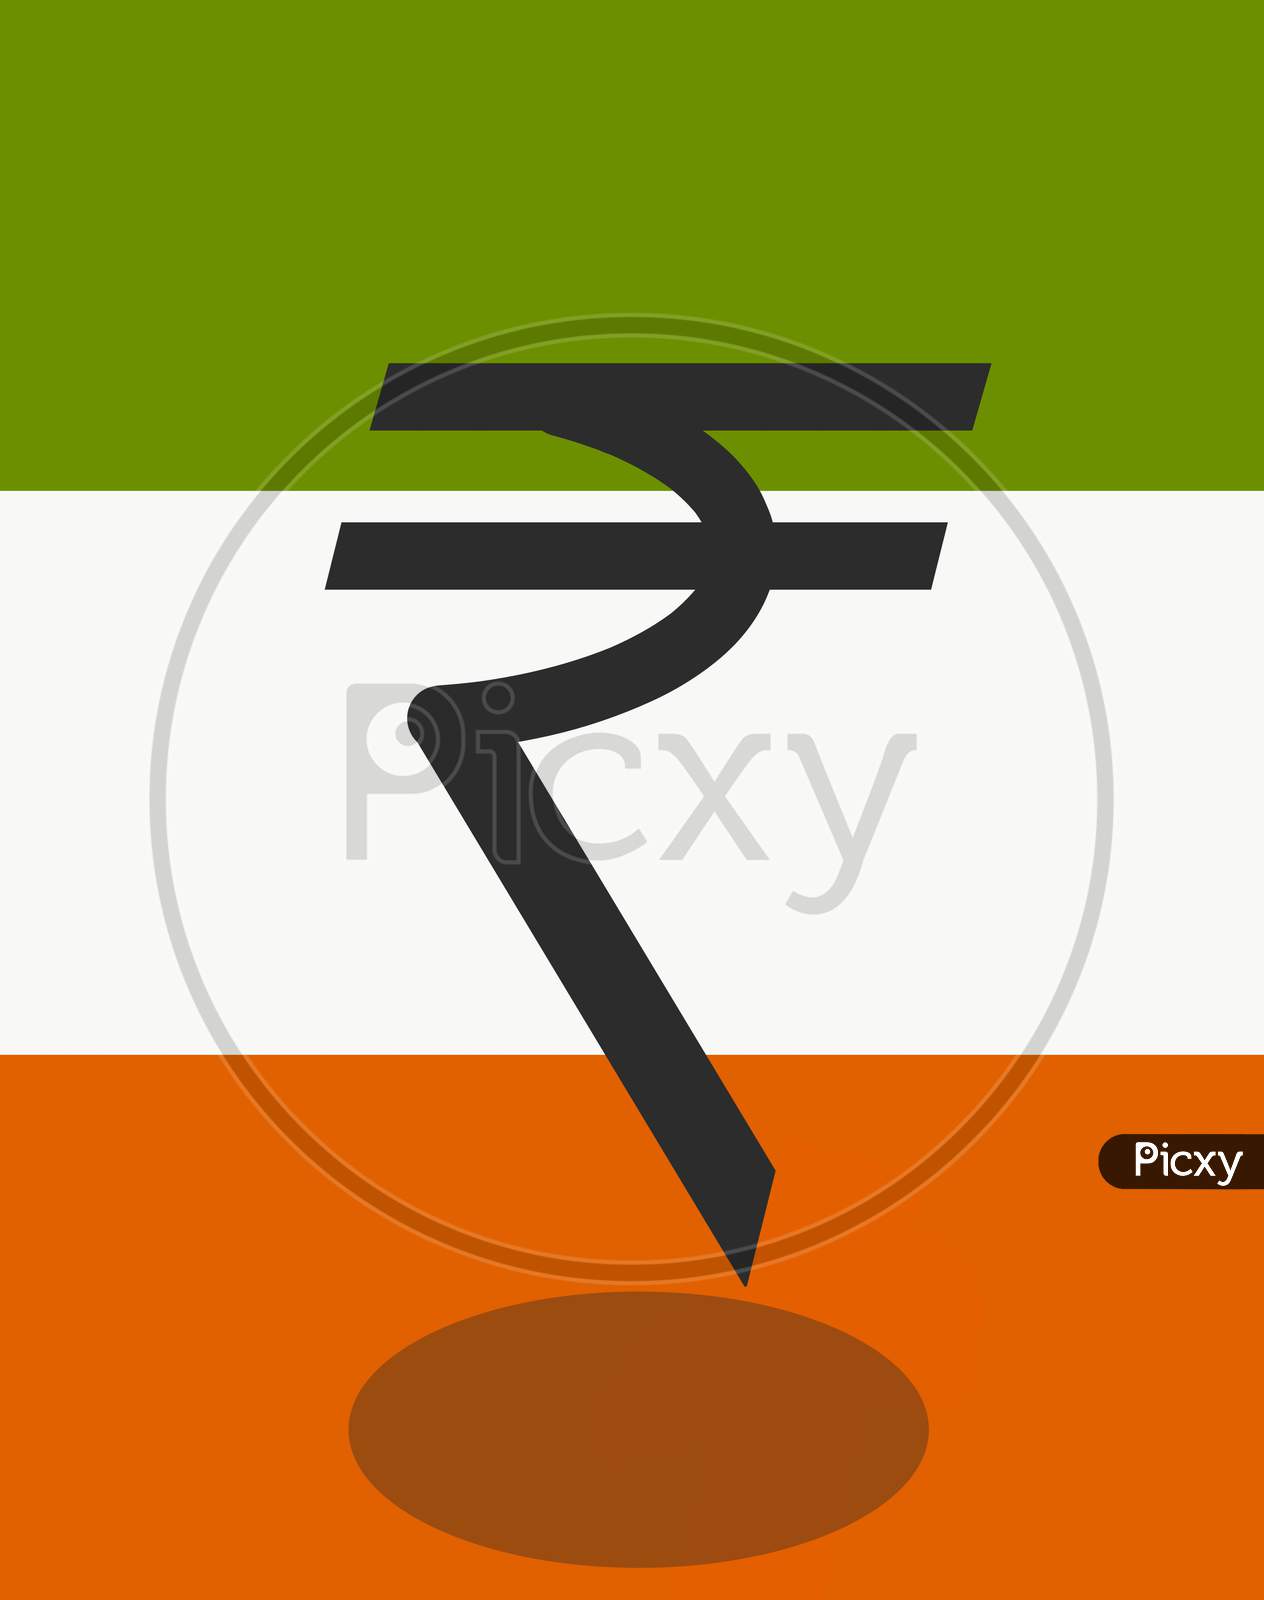 Black Rupee Sign With Indian Flag In Background